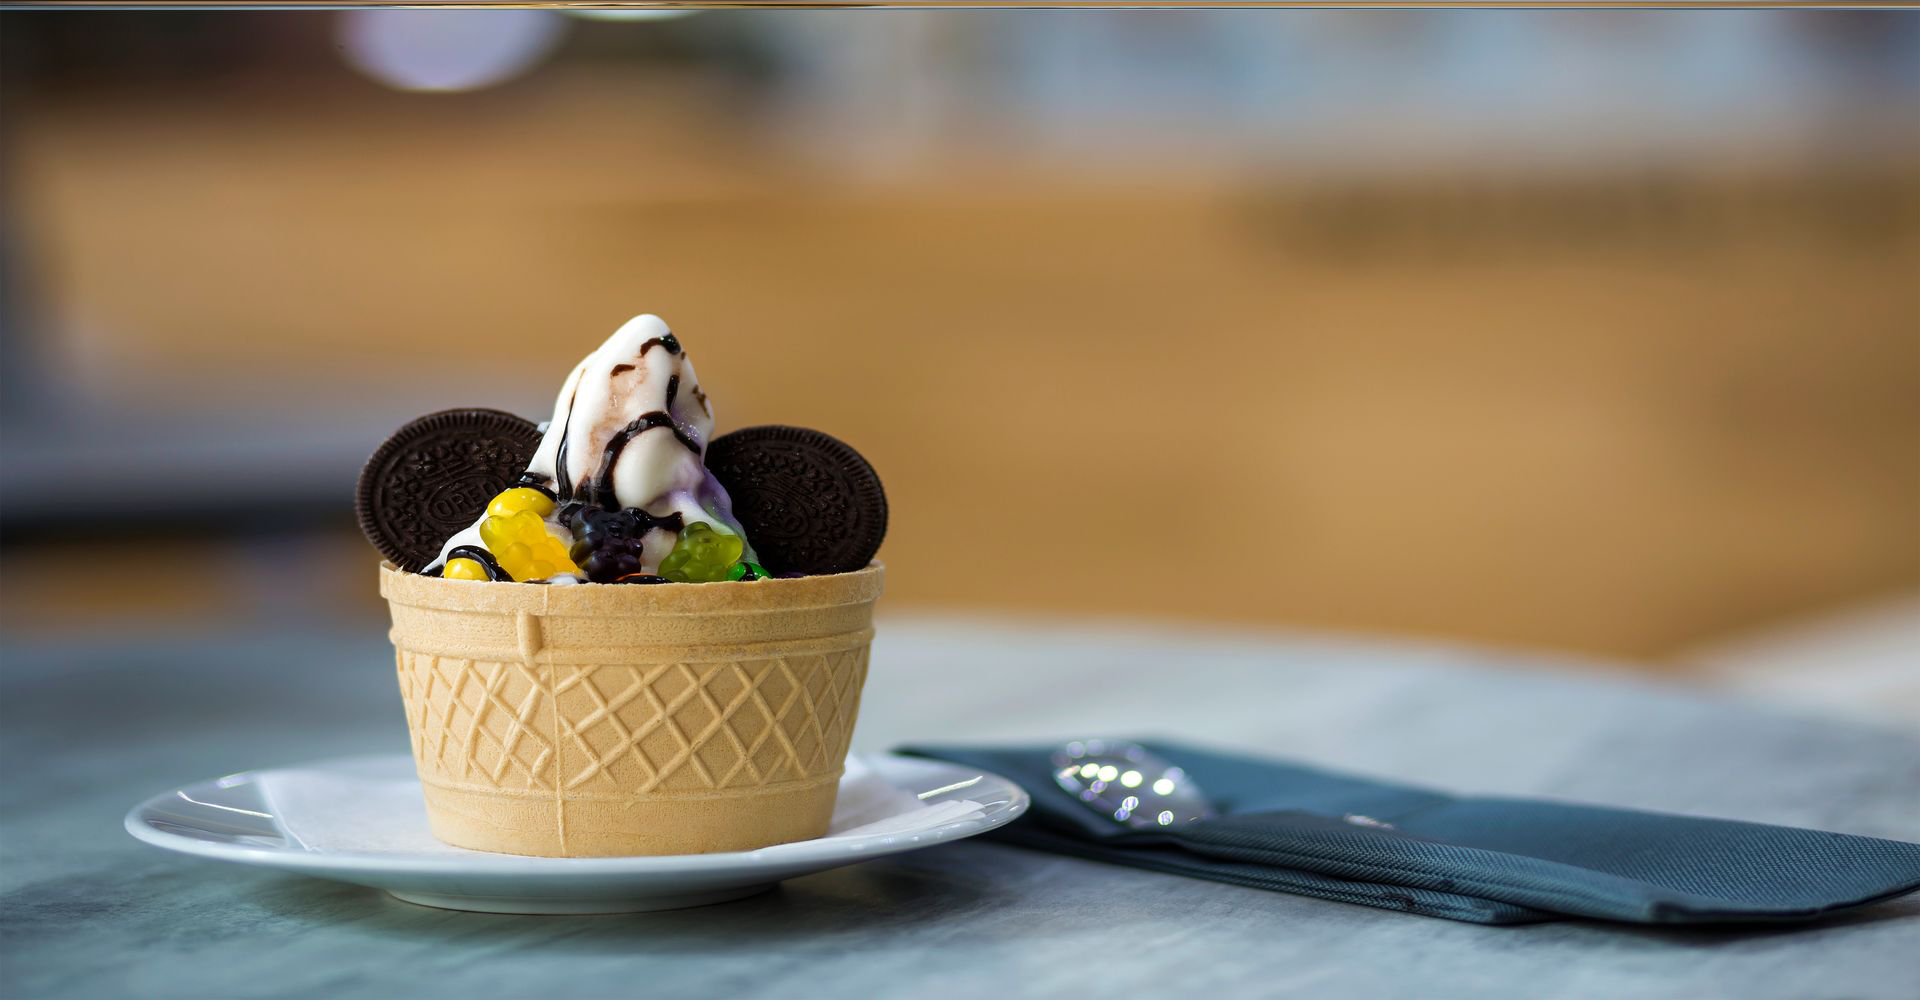 white-plate-with-ice-cream-dessert-wafer-cup-with-chocolate-cookies-creative-decoration-topping-blurred-colorful-interior